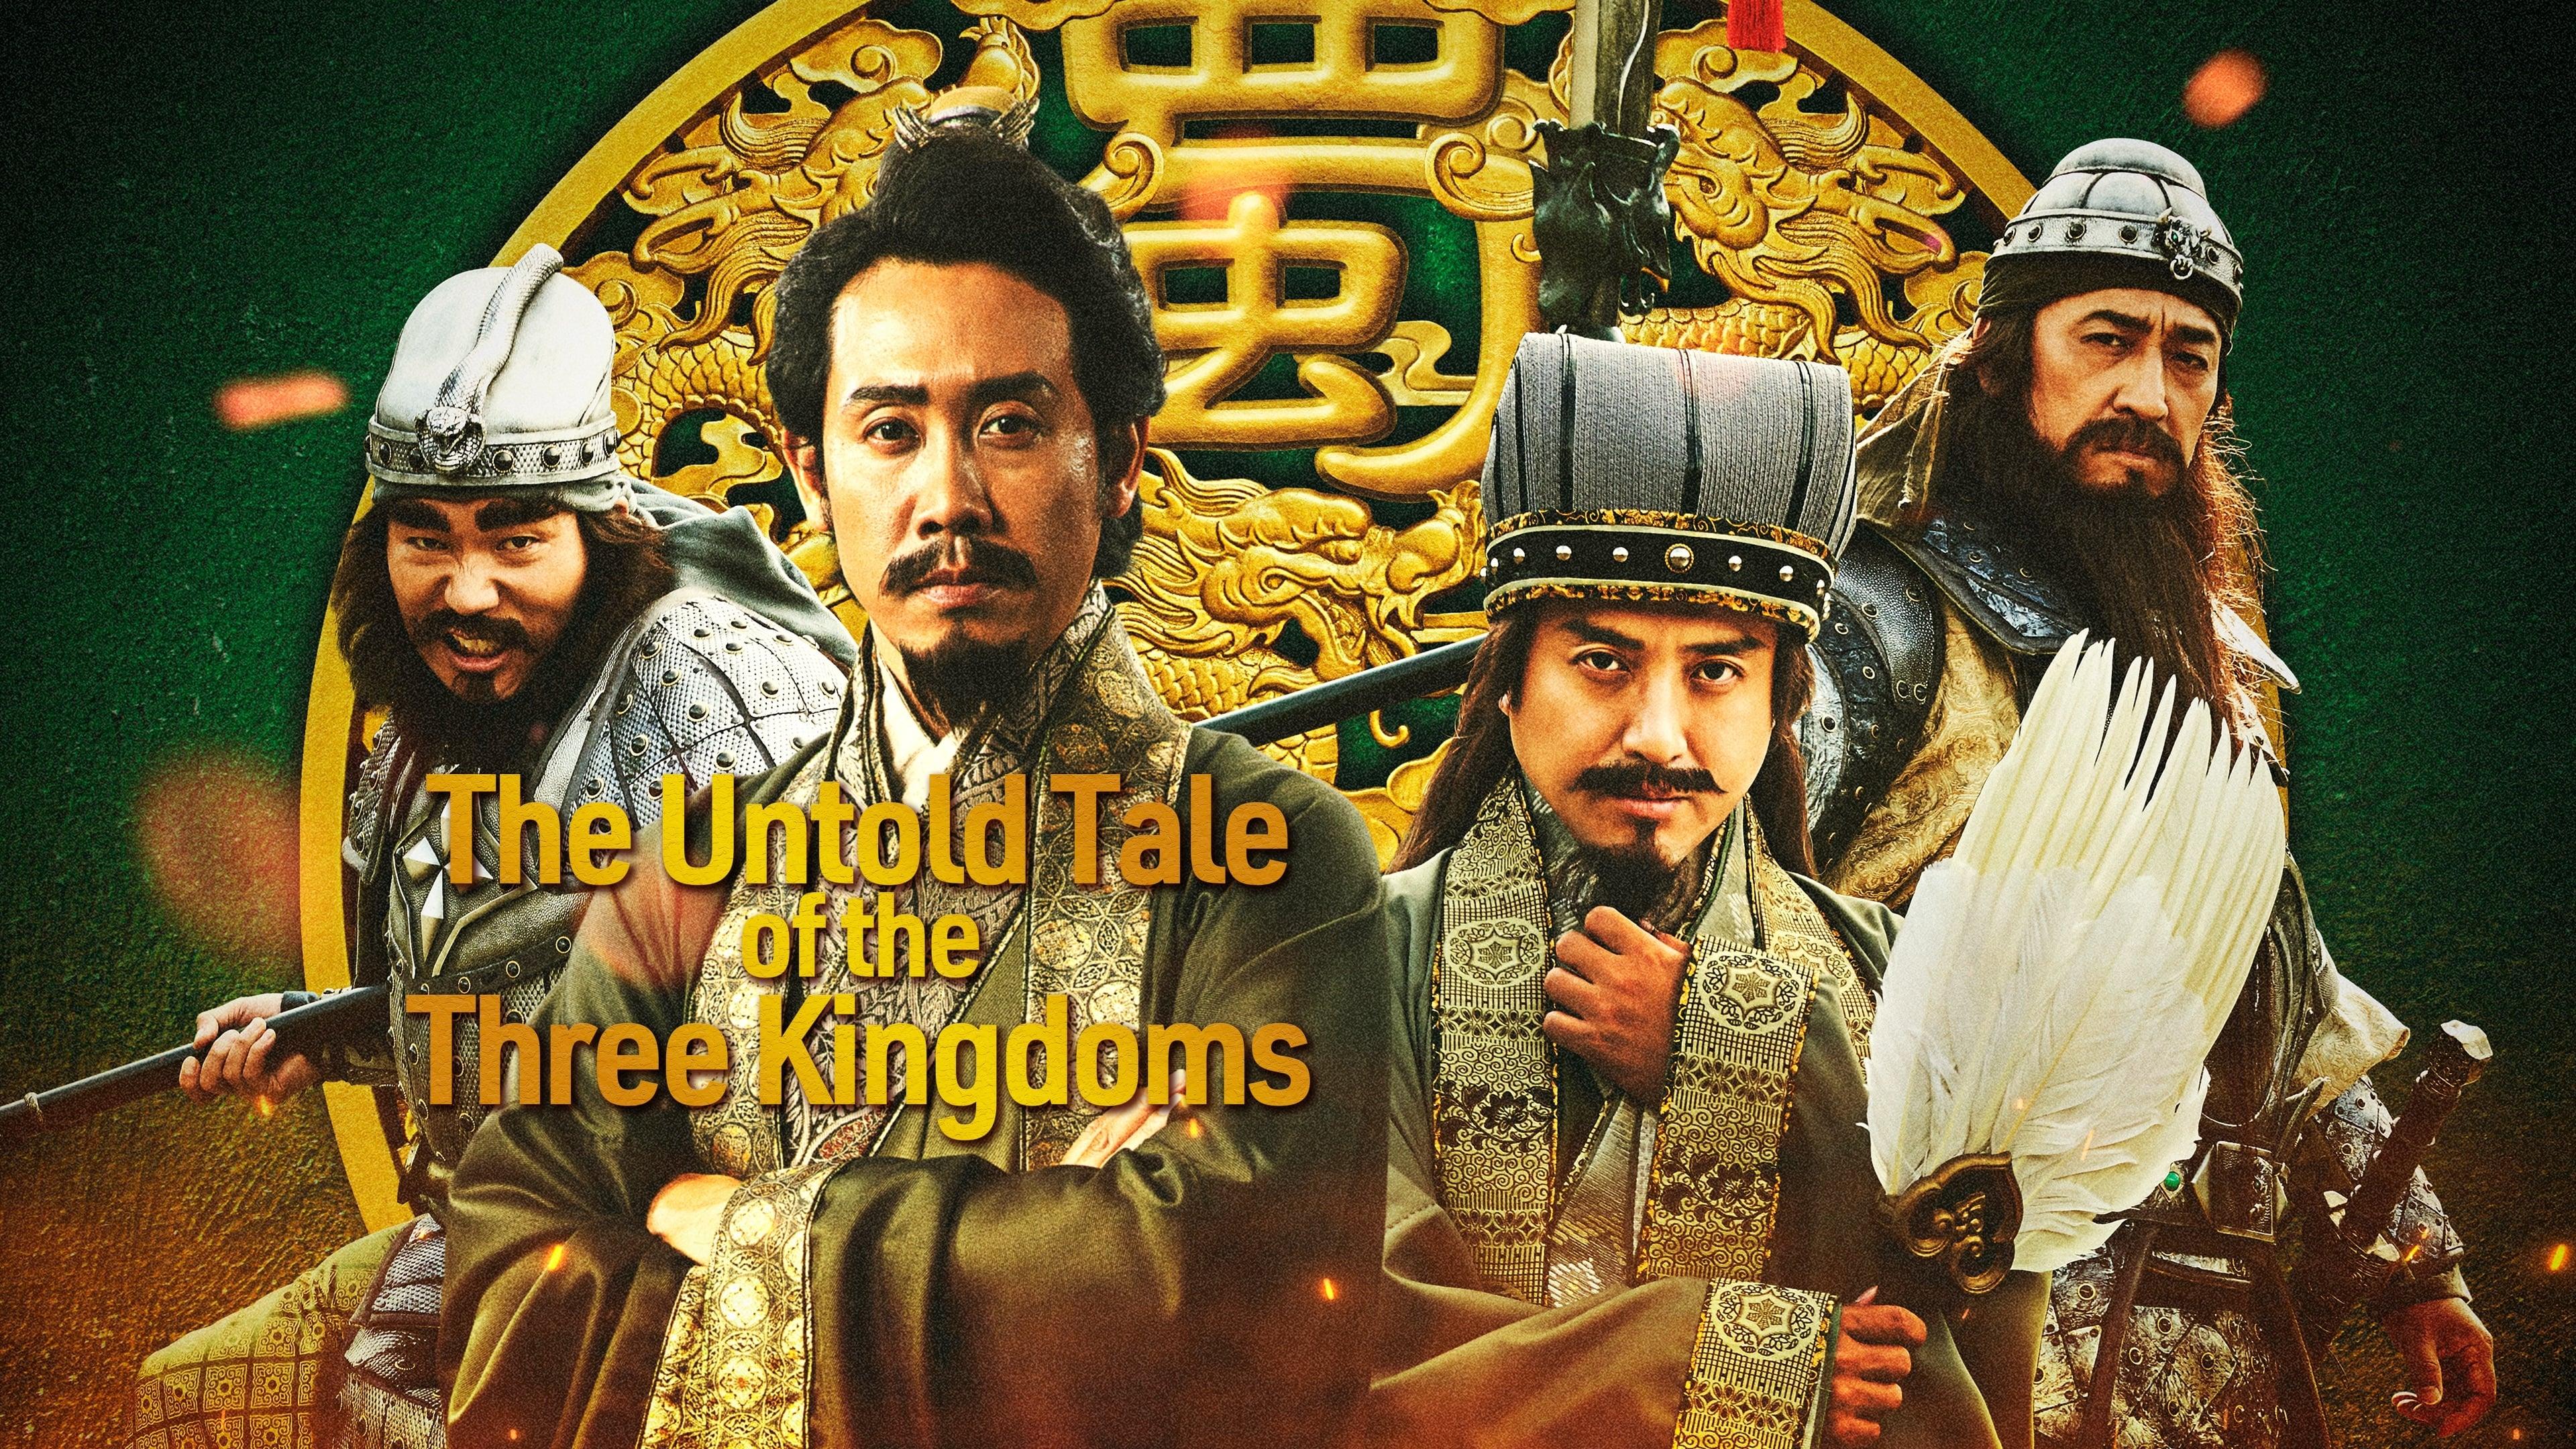 The Untold Tale of the Three Kingdoms backdrop